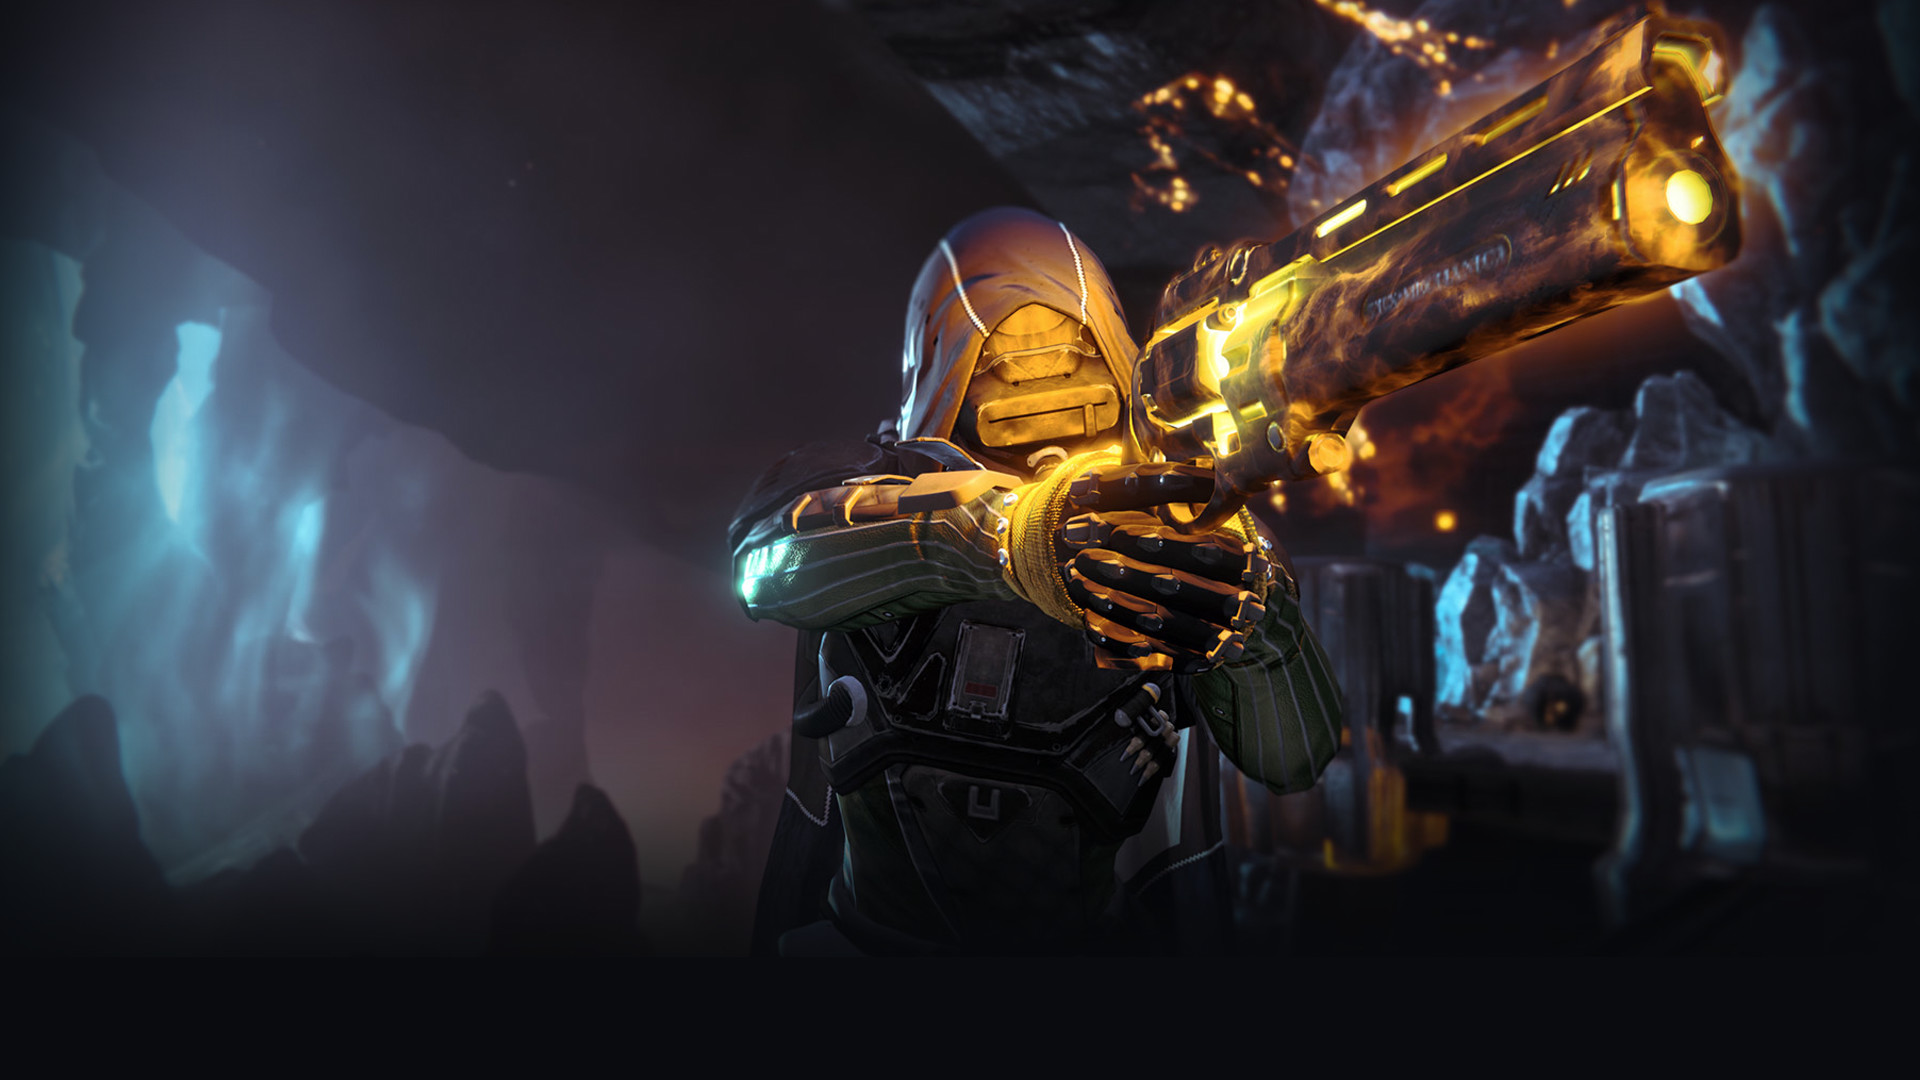 1920x1080 Destiny Wallpapers Collection For Free Download | HD Wallpapers ... Bungie  ...